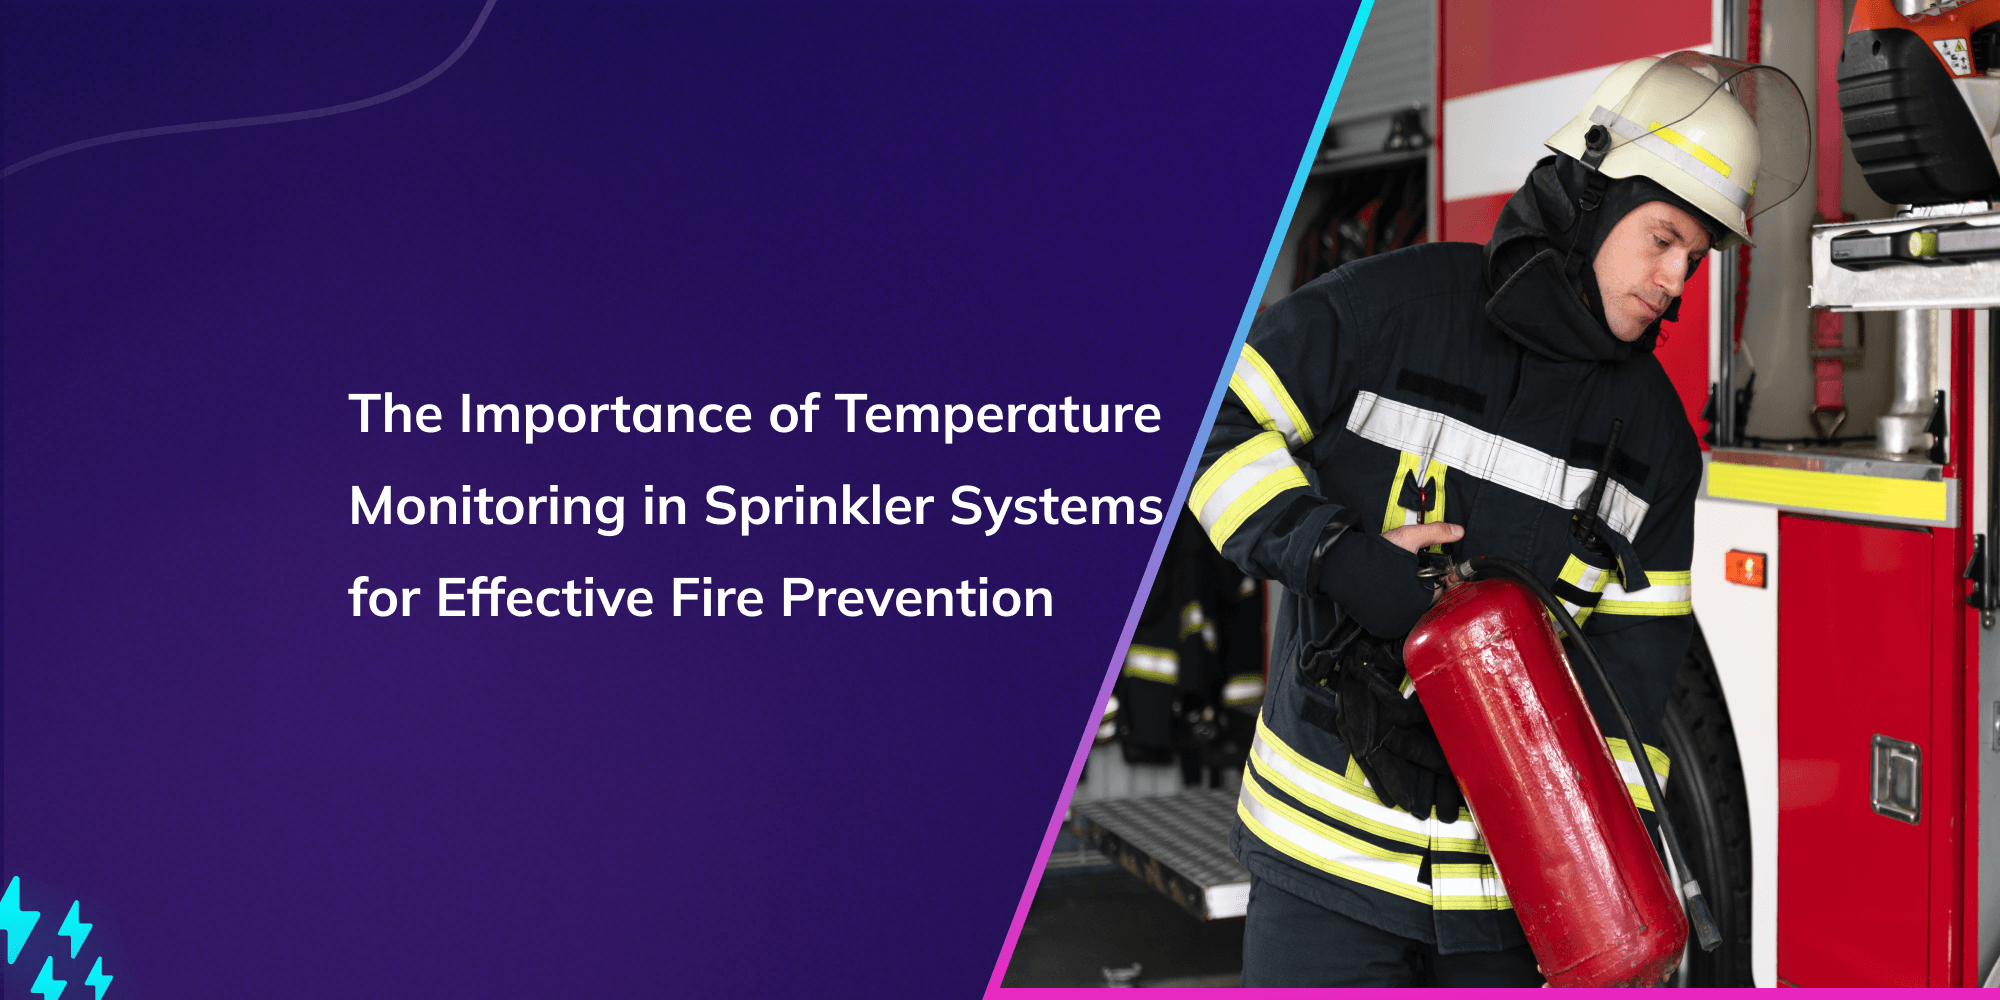 The Importance of Temperature Monitoring in Sprinkler Systems for Effective Fire Prevention